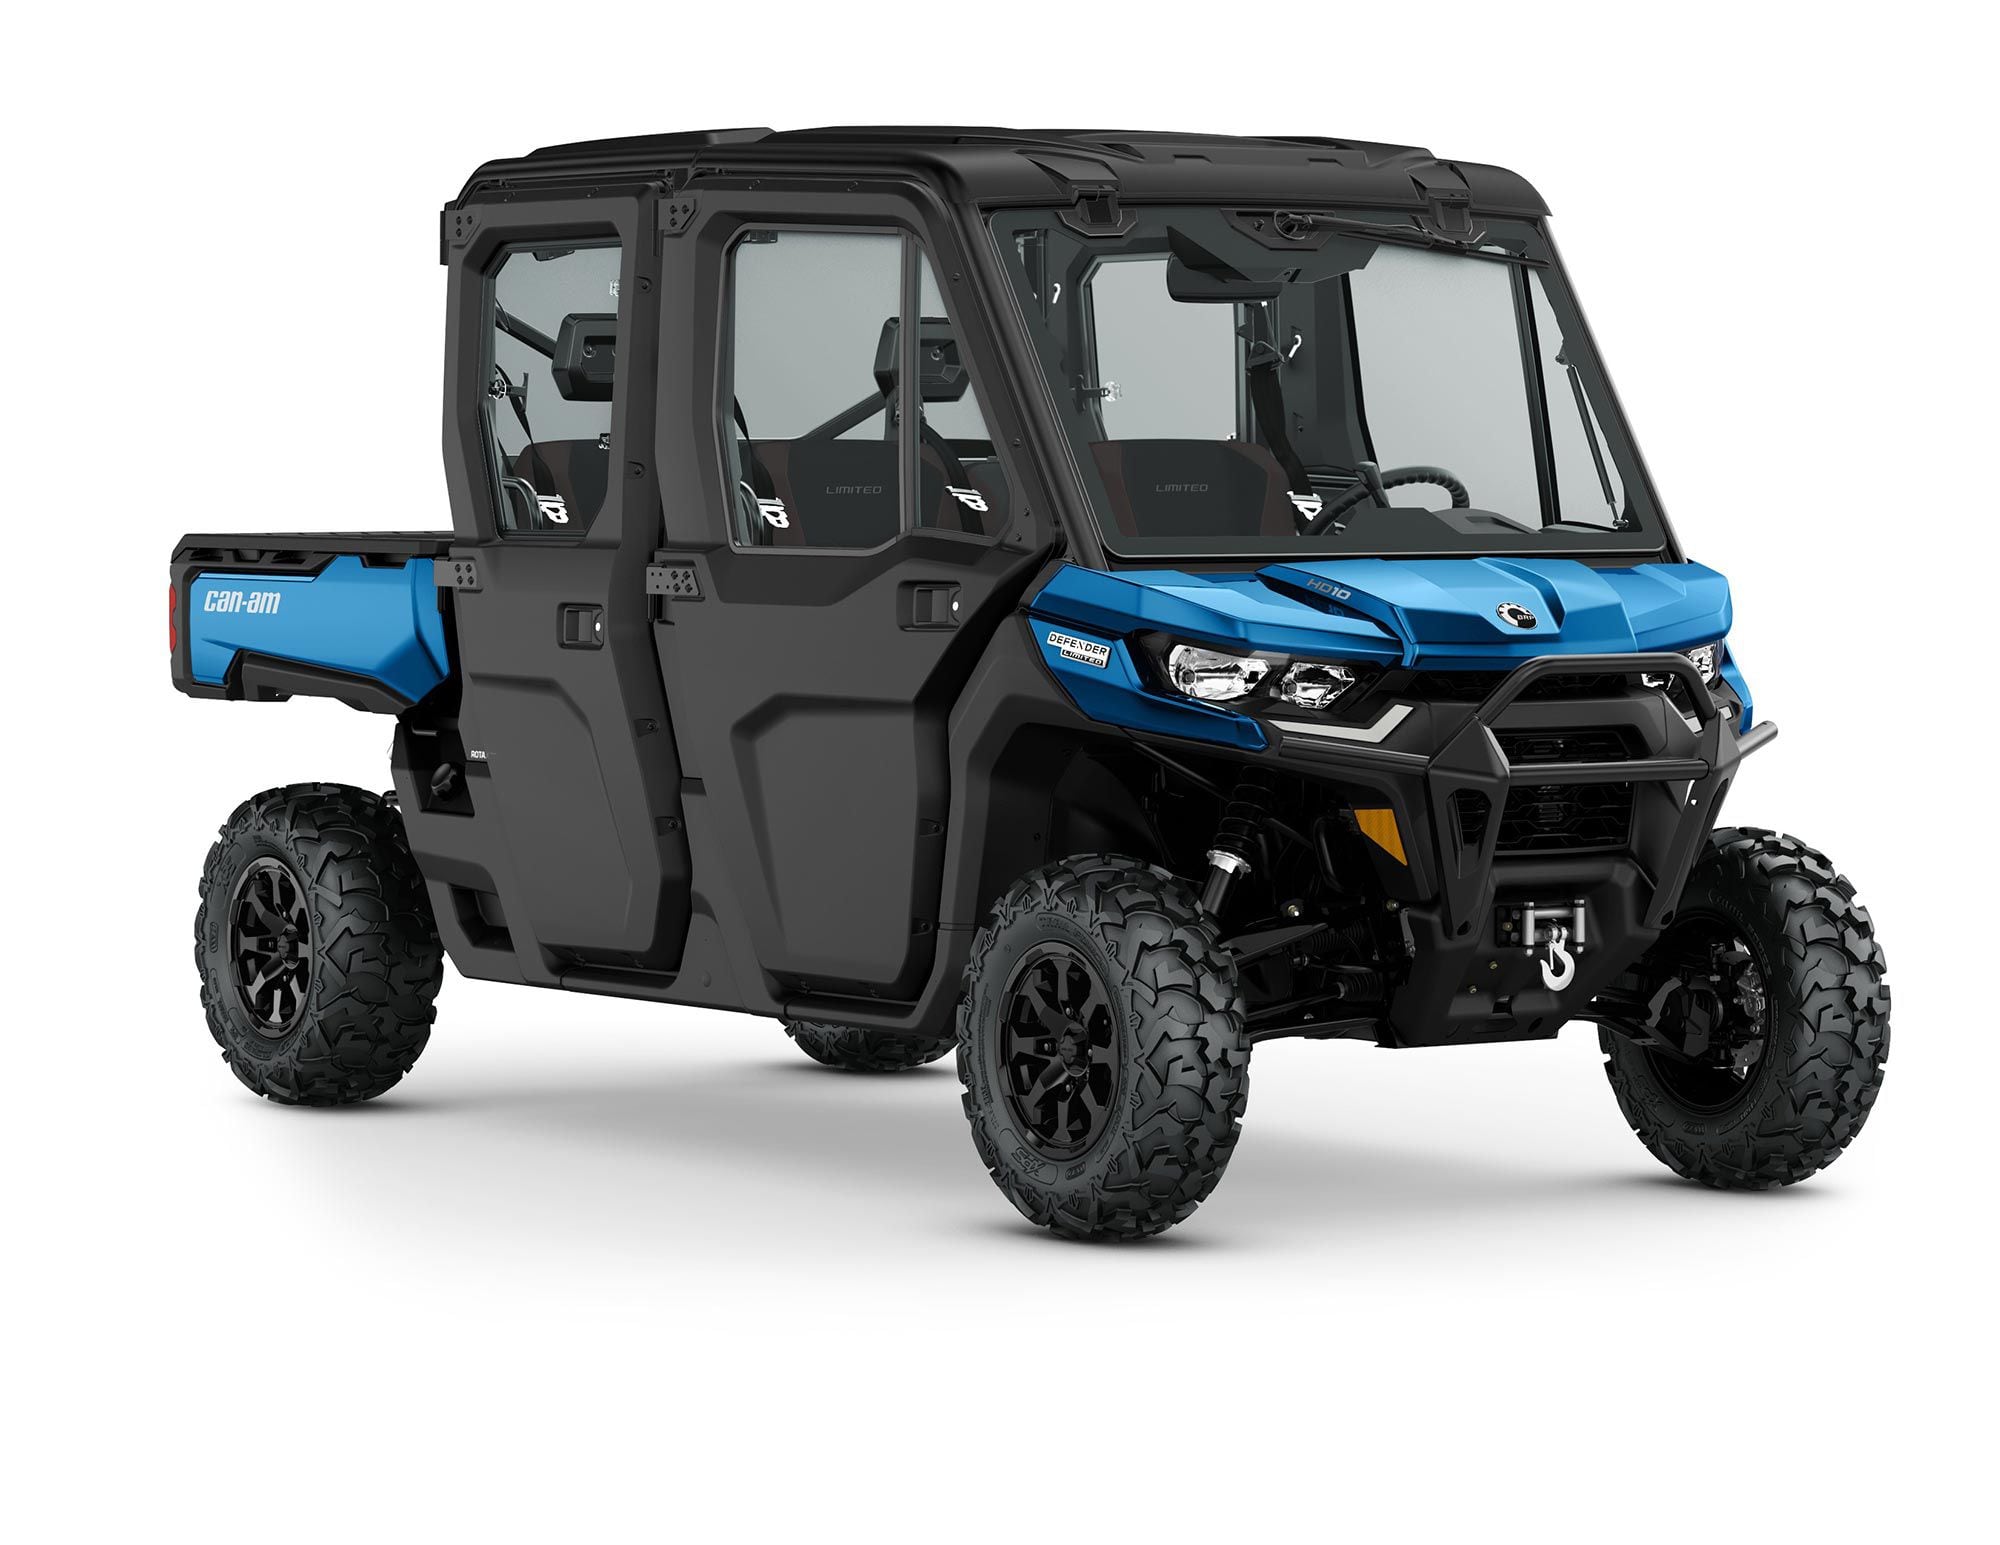 2022 Can Am Defender Limited Max Er S Guide Specs Photos Utv Driver - 2021 Can Am Defender Limited Seat Covers